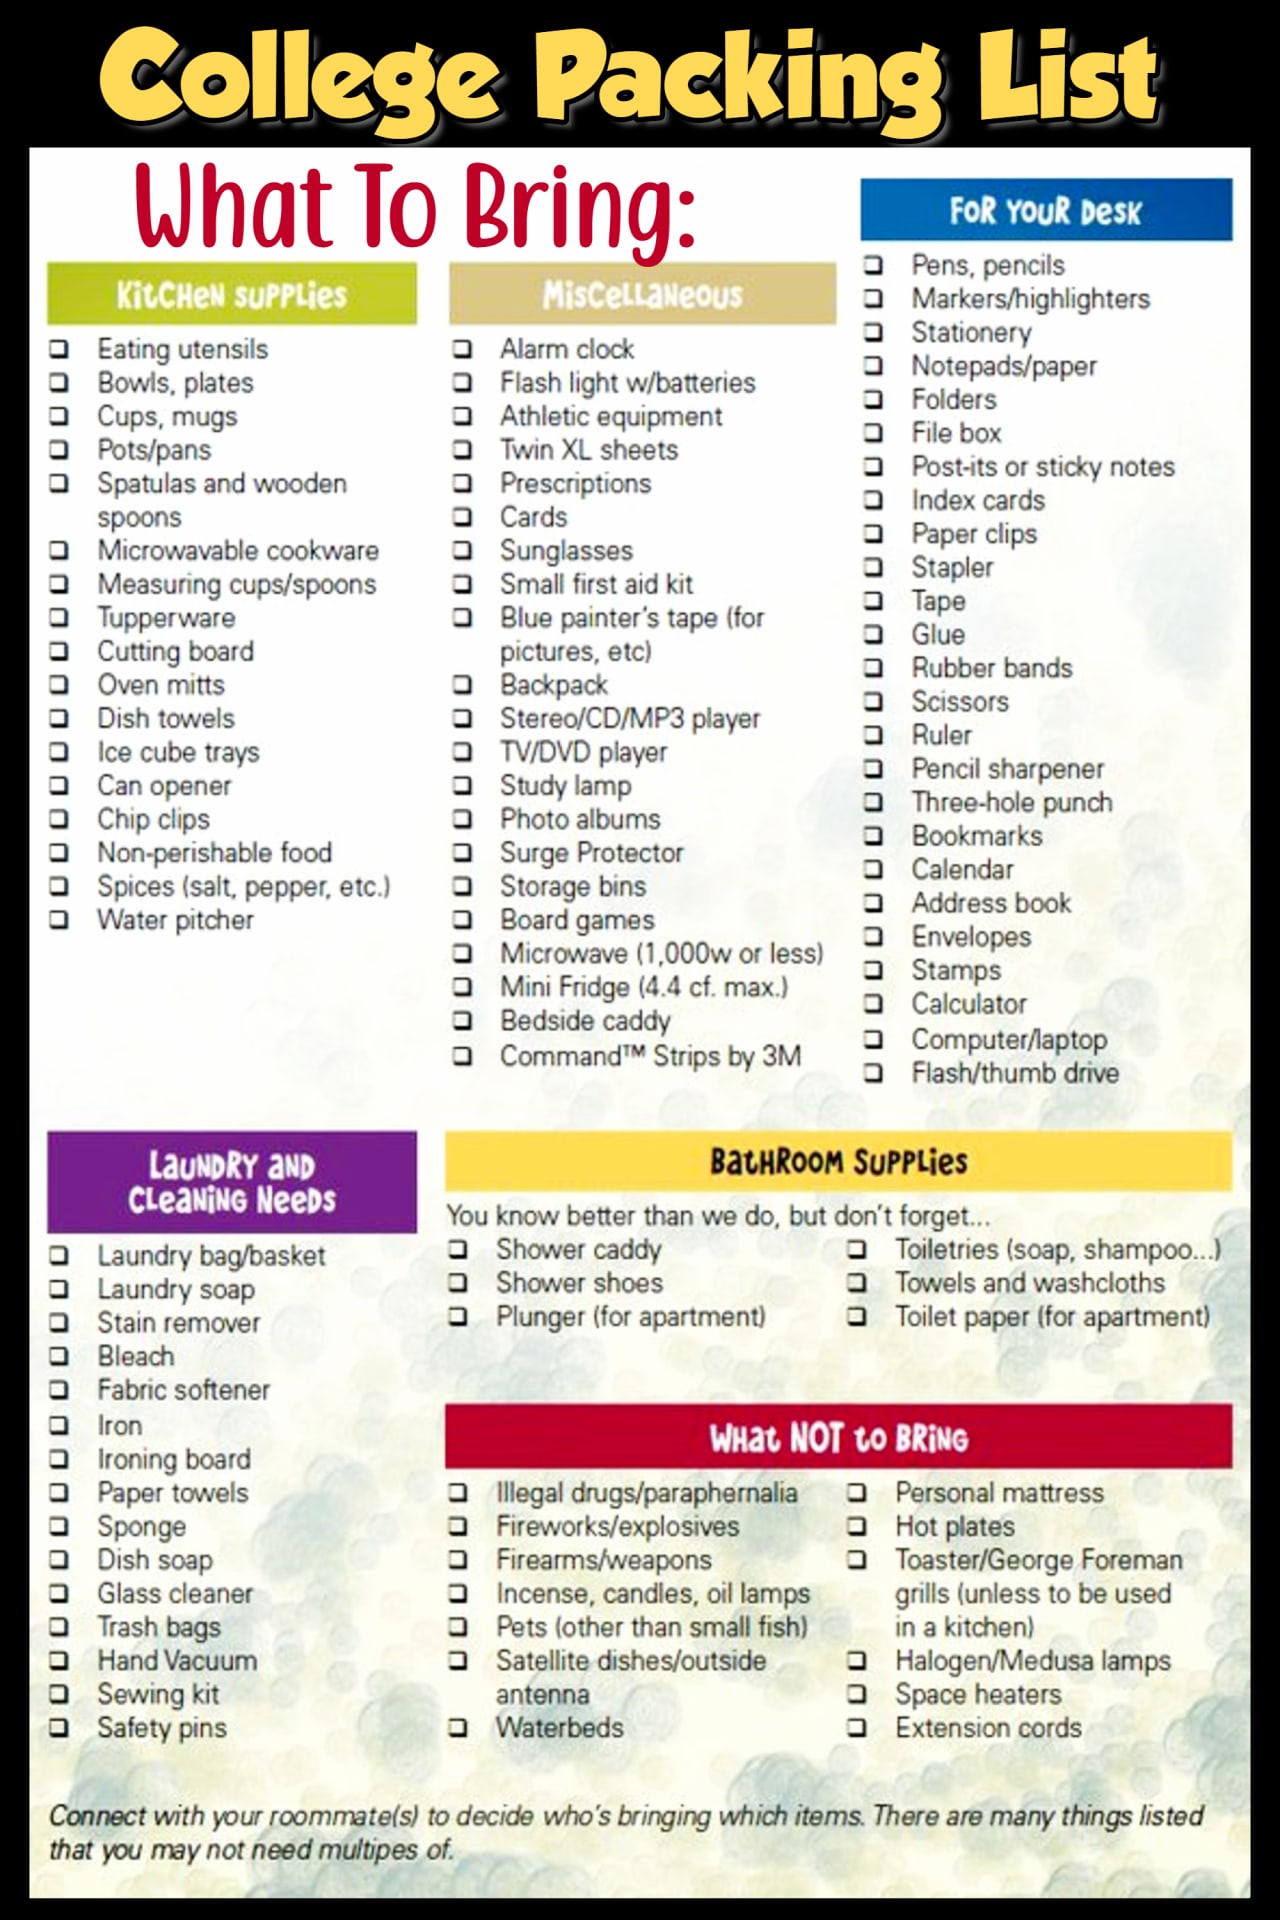 College packing list - dorm room checklist - what to pack for college freshman year - essential dorm room supplies check lists - dorm room shopping list